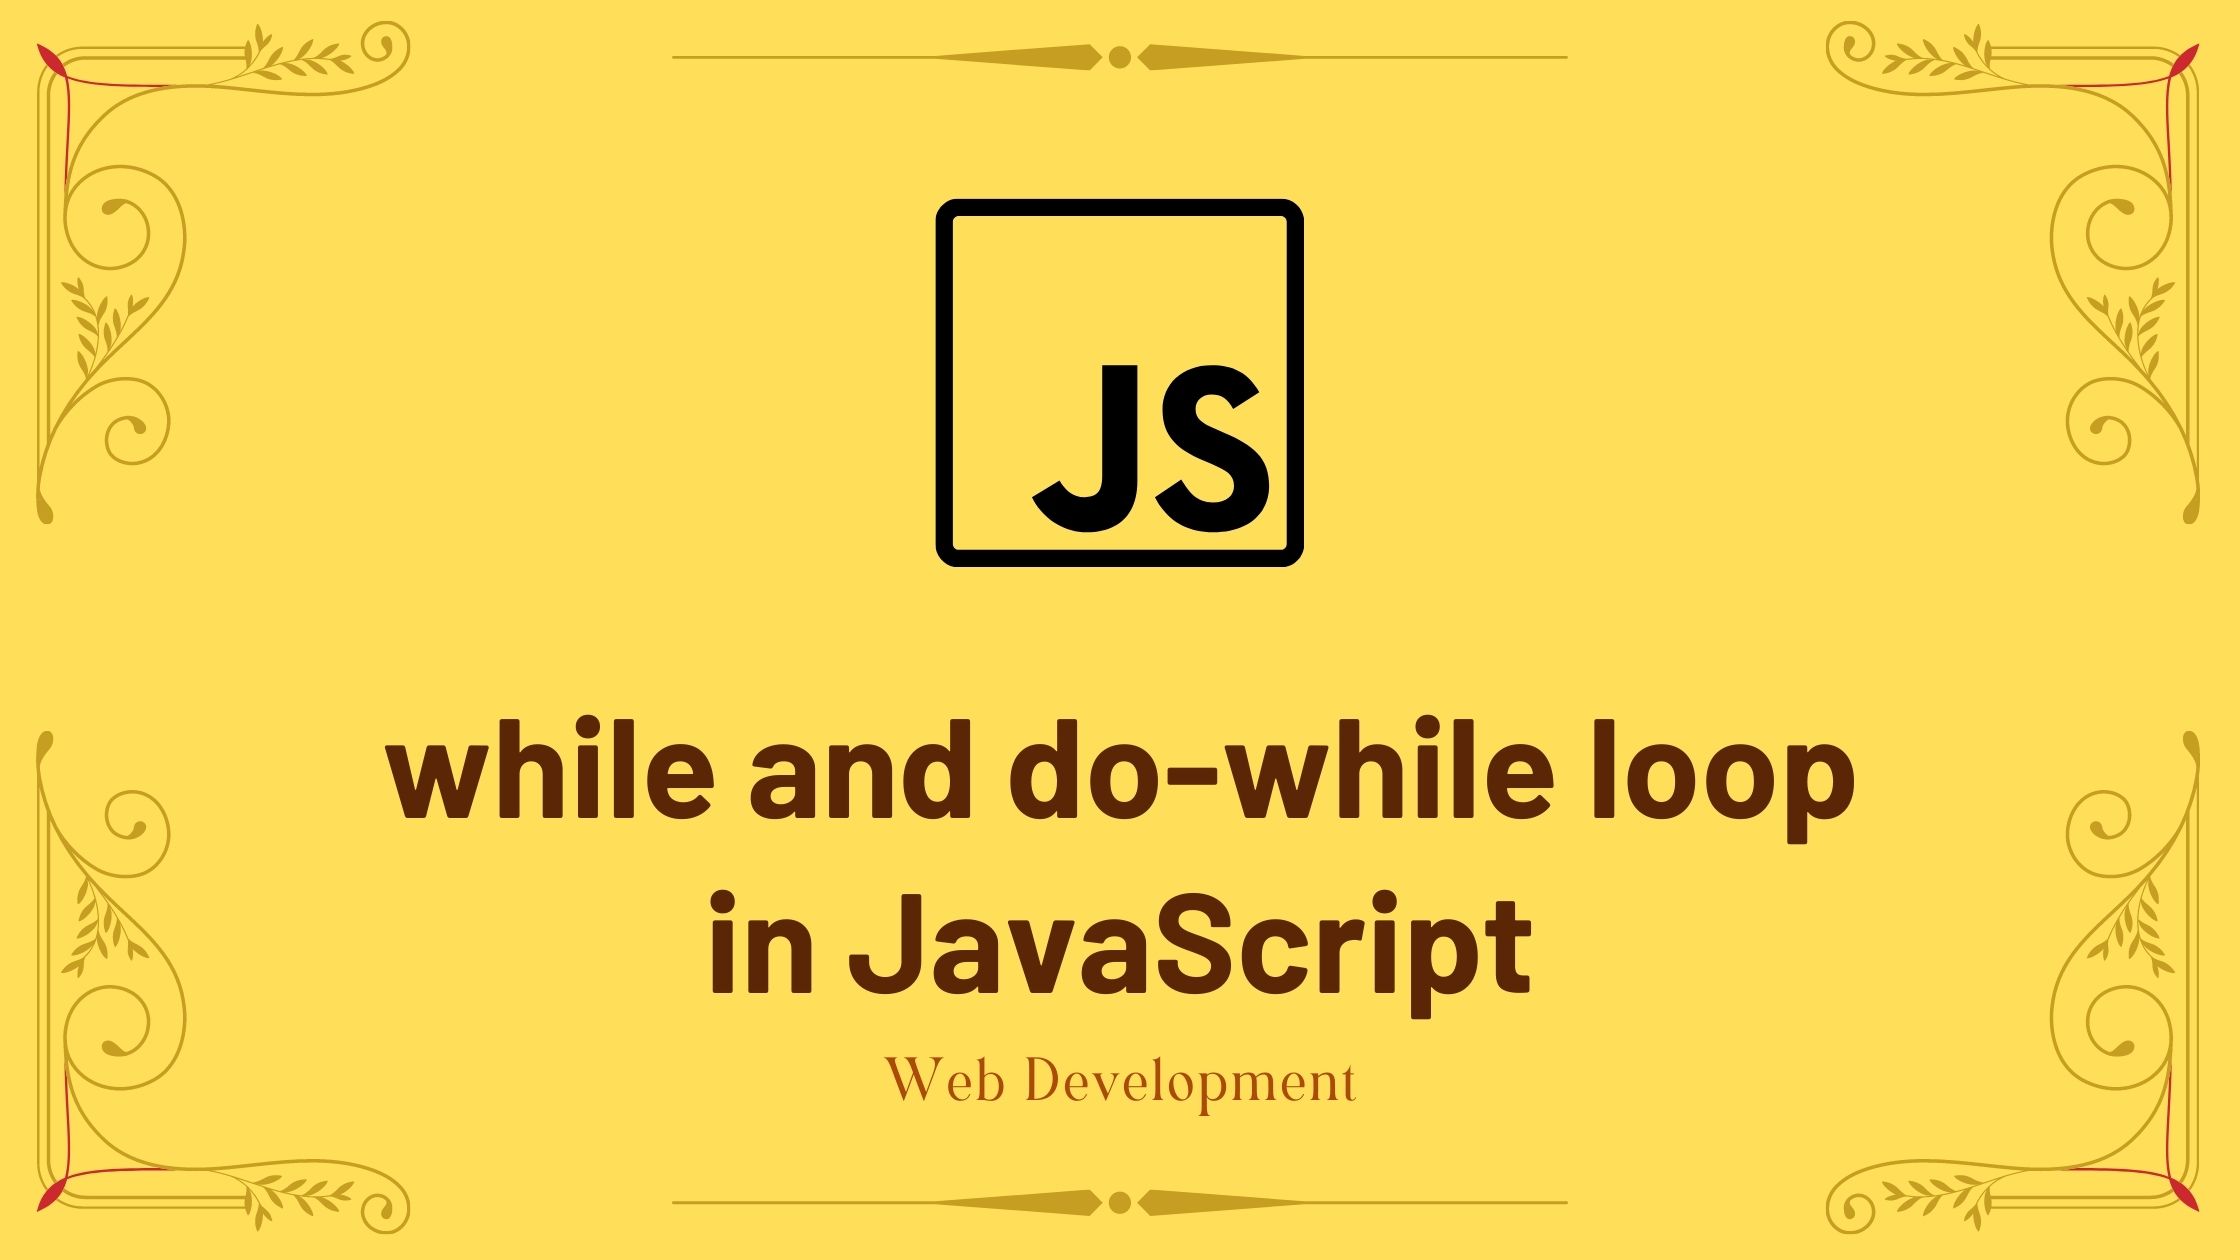 while and do-while loop in JavaScript